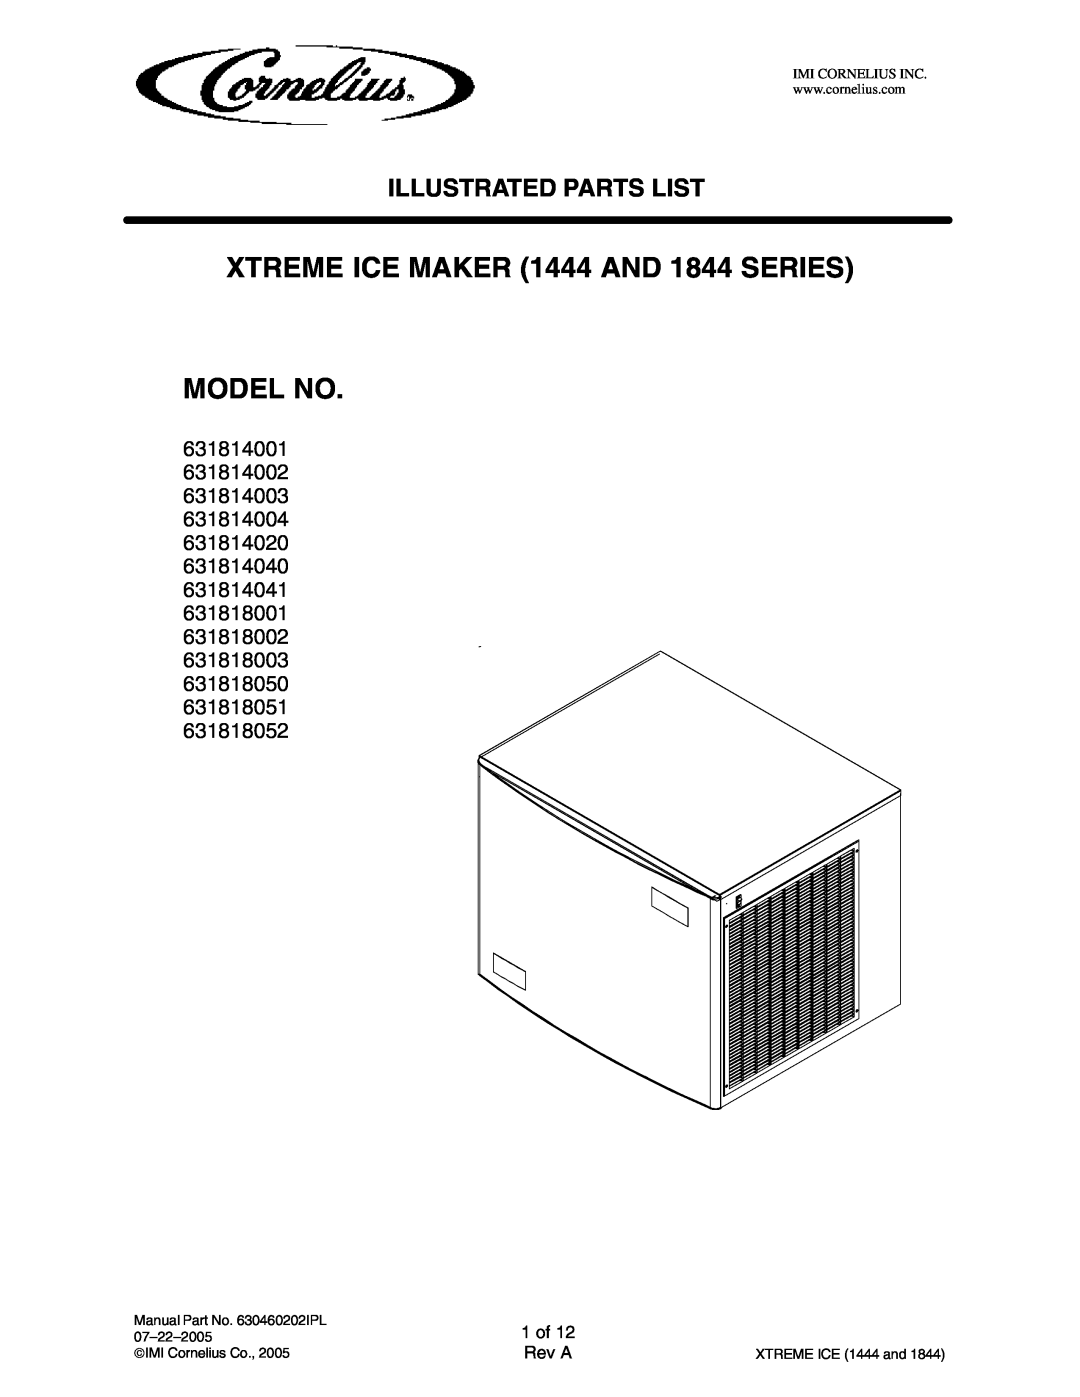 Cornelius 631814003, 631818052 manual XTREME ICE MAKER 1444 AND 1844 SERIES MODEL NO, Illustrated Parts List, 1 of, Rev A 